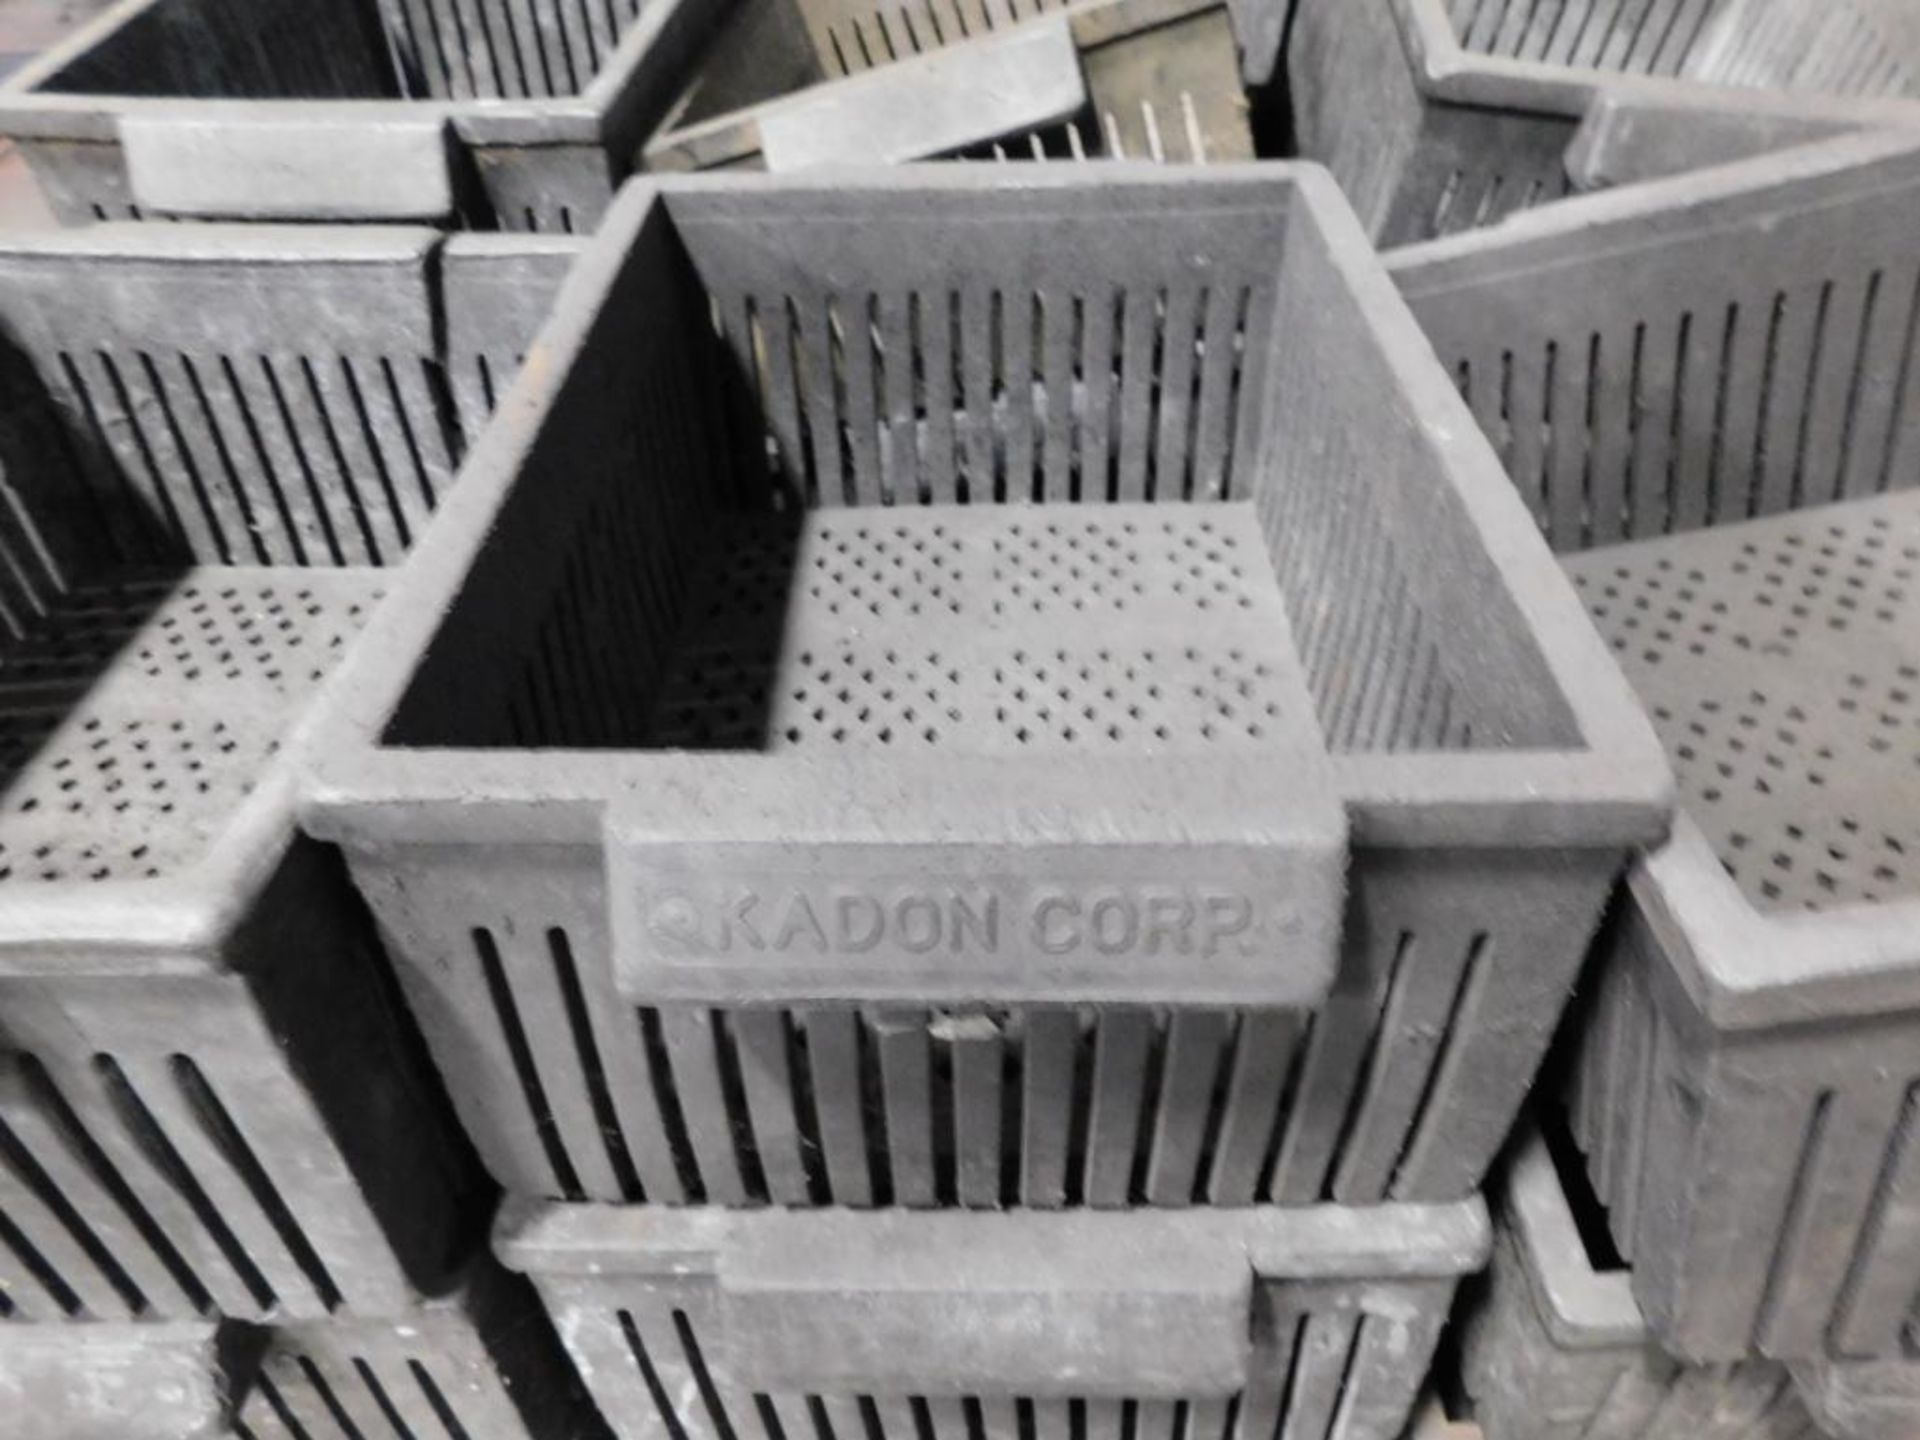 LOT: (47 approx.) Kadon Corp. Oven Baskets - Image 3 of 4